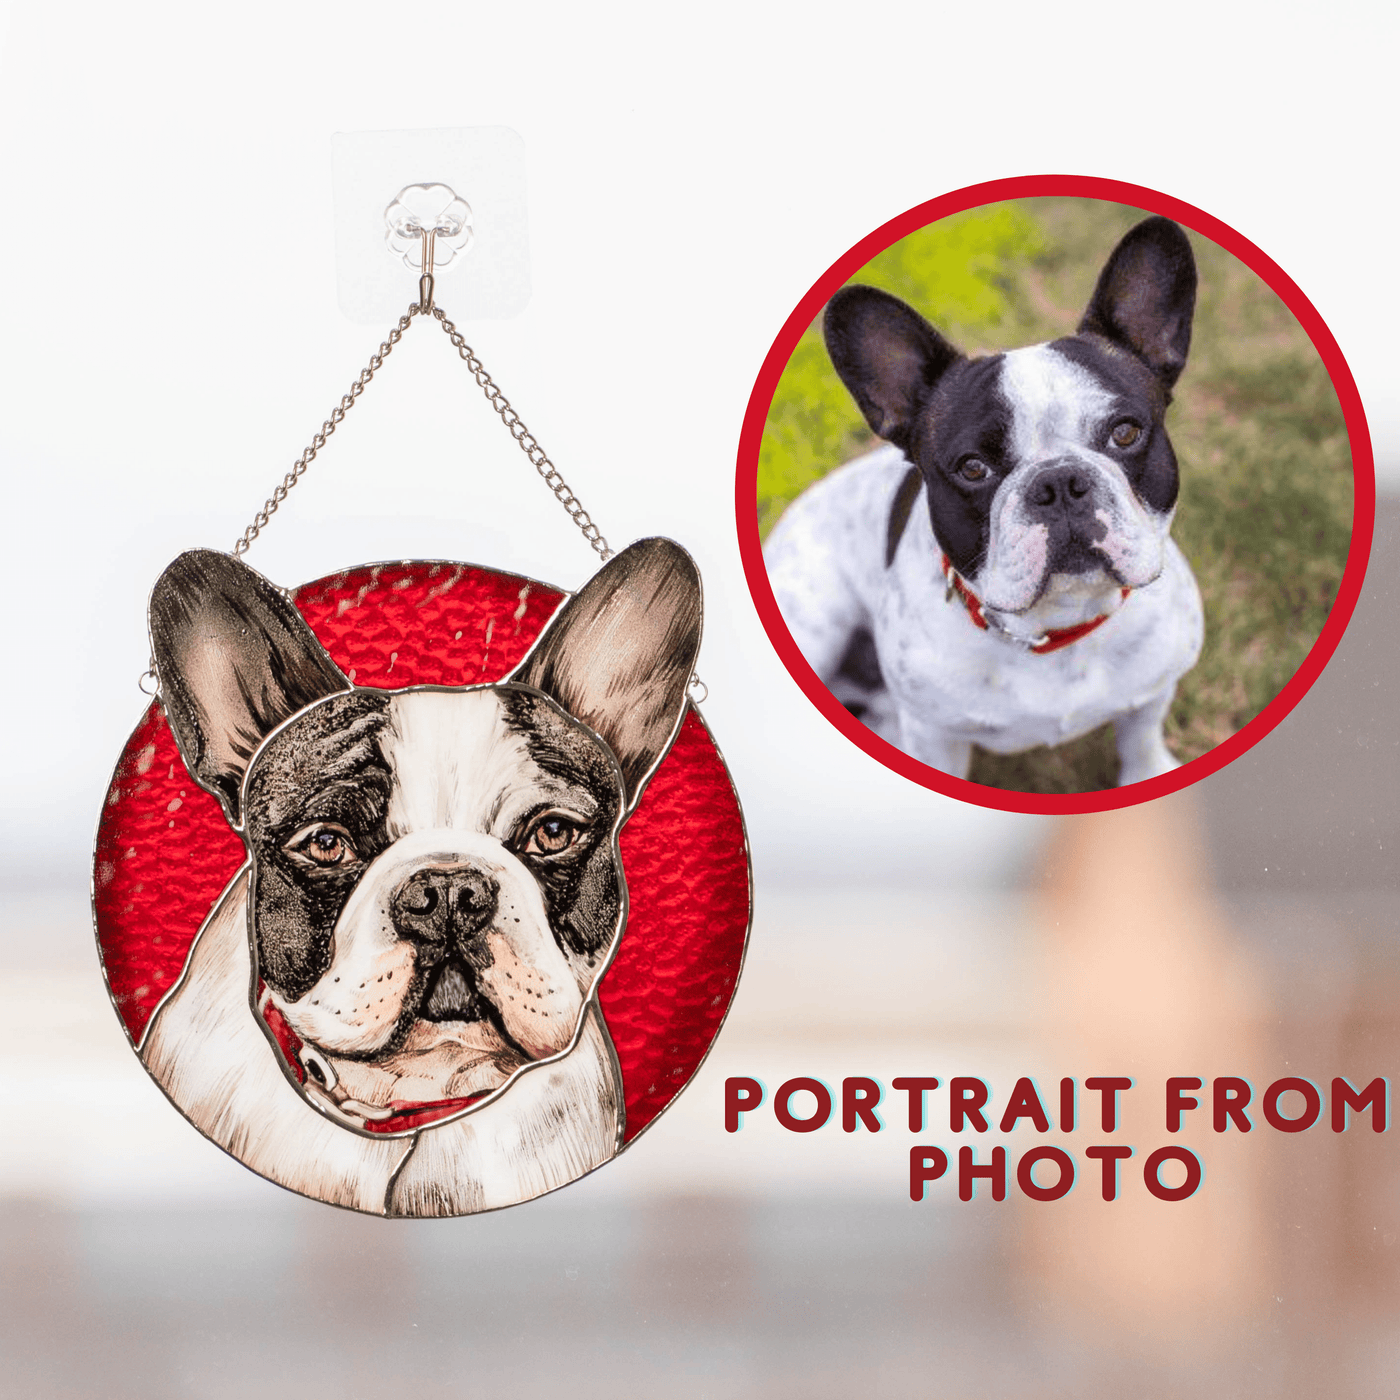 Stained glass hand-painted round pet portrait of a dog in comparison with the real photo